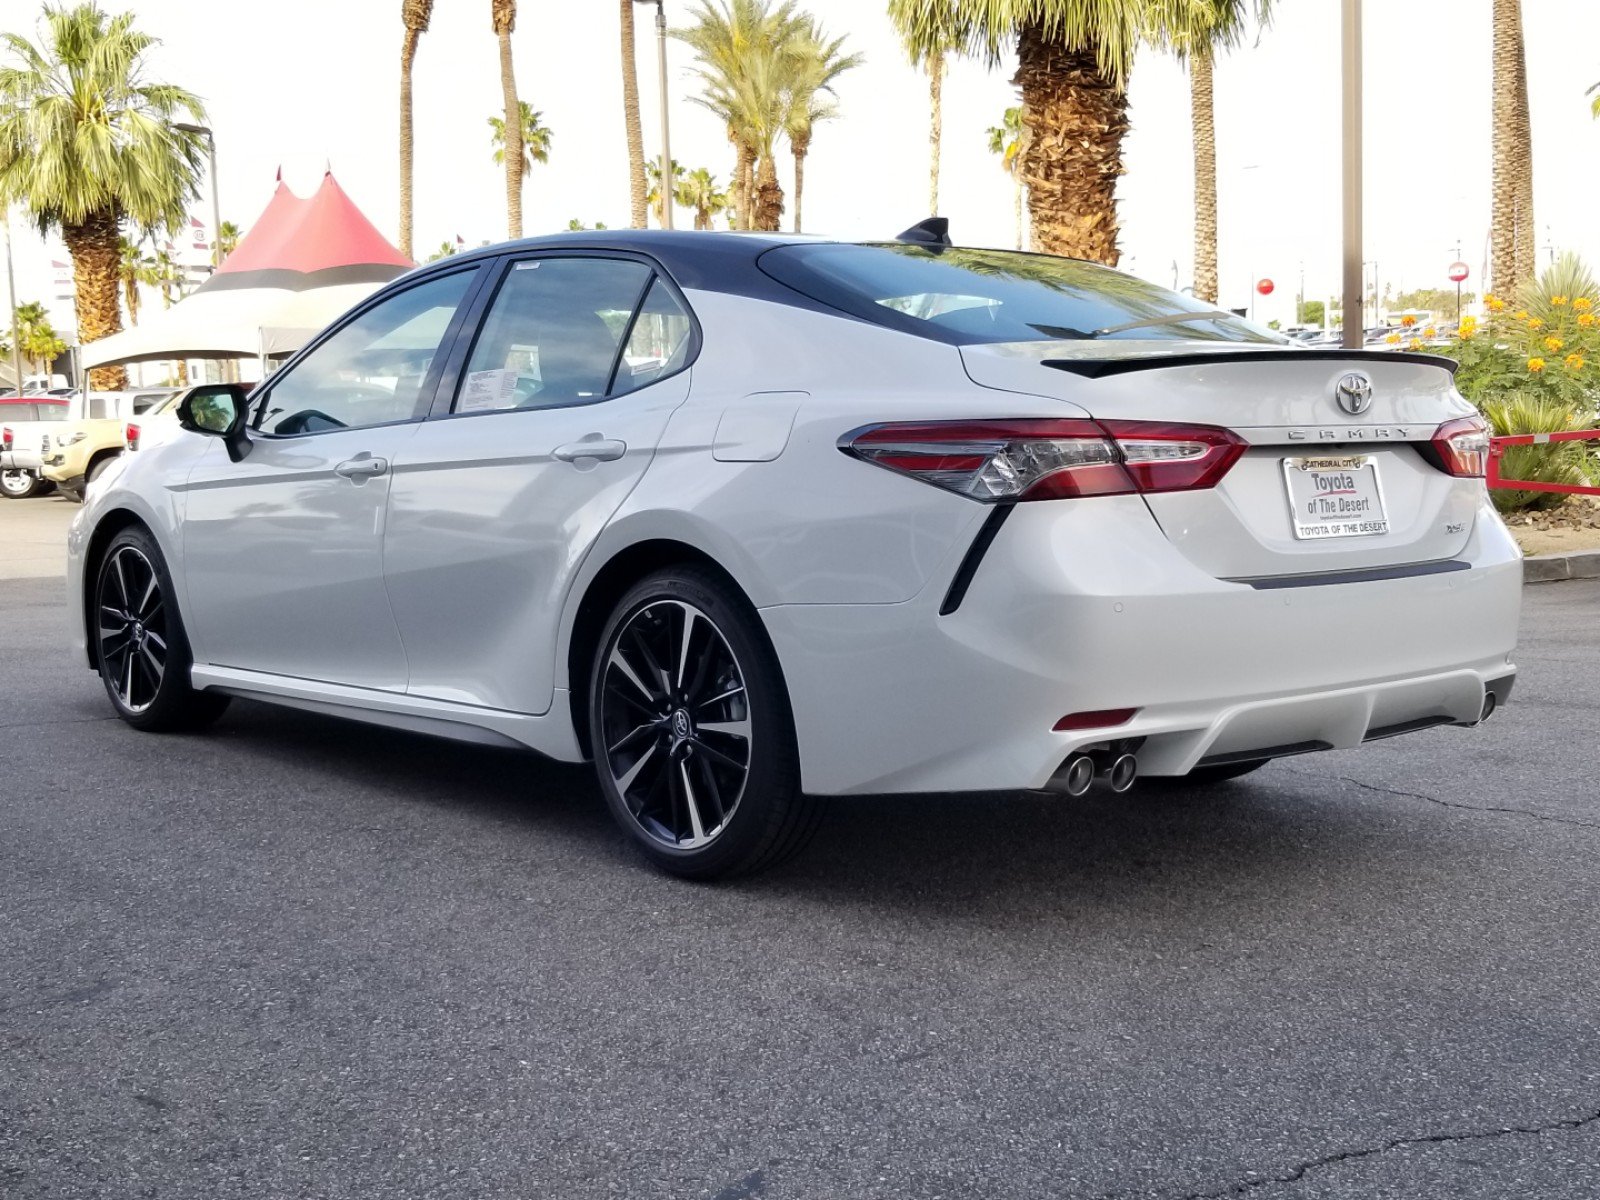 New 2019 Toyota Camry XSE V6 4dr Car in Cathedral City #239240 | Toyota